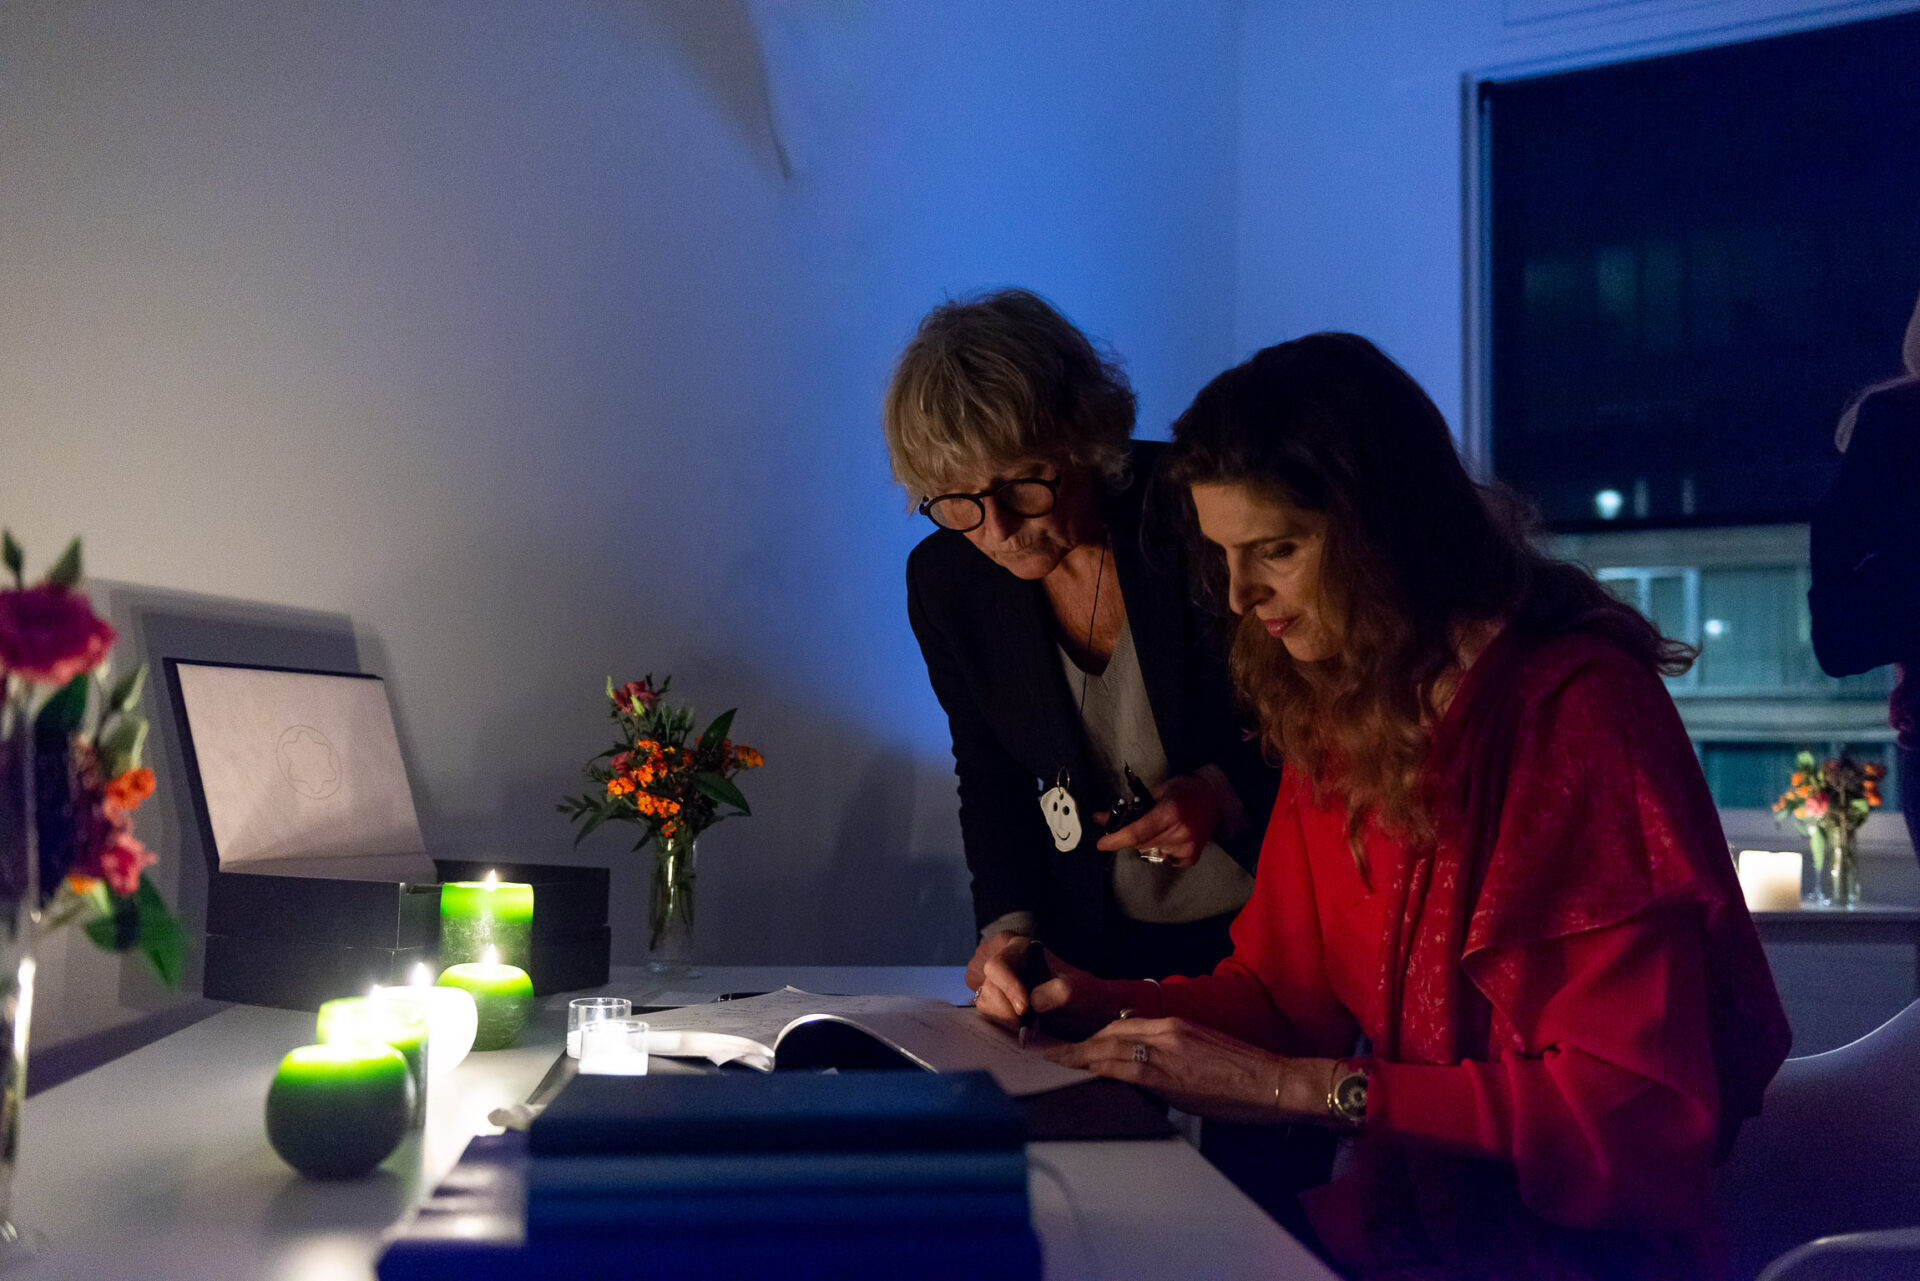 The writing workshop with a calligrapher during this dinner organized by Belgium Sotheby's International Realty.